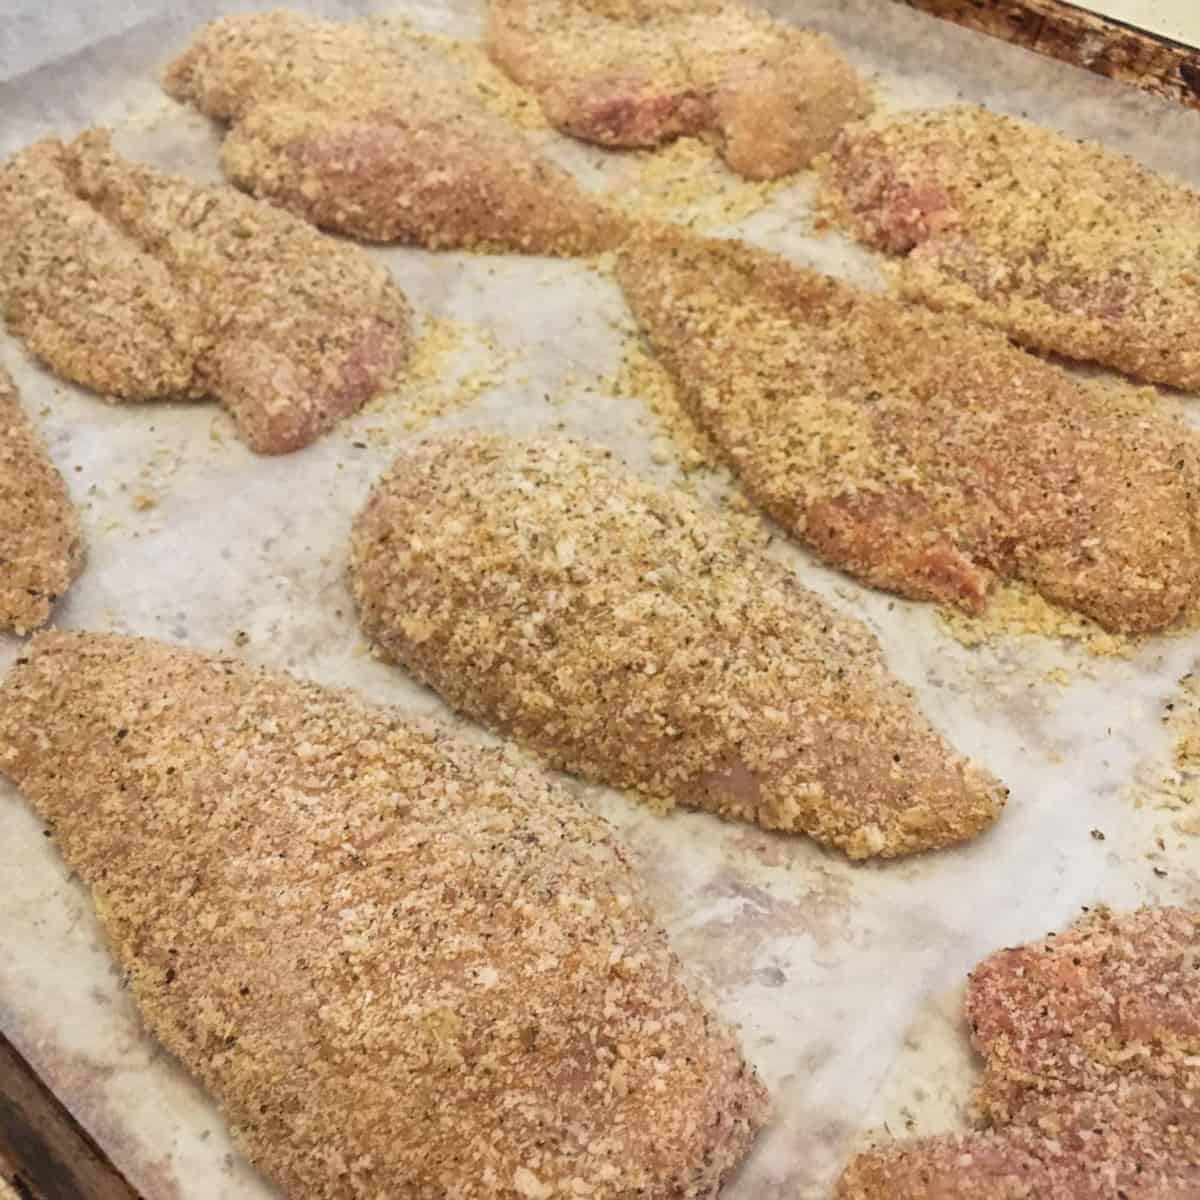 Raw chicken breast coated with bread crumbs on a baking sheet.